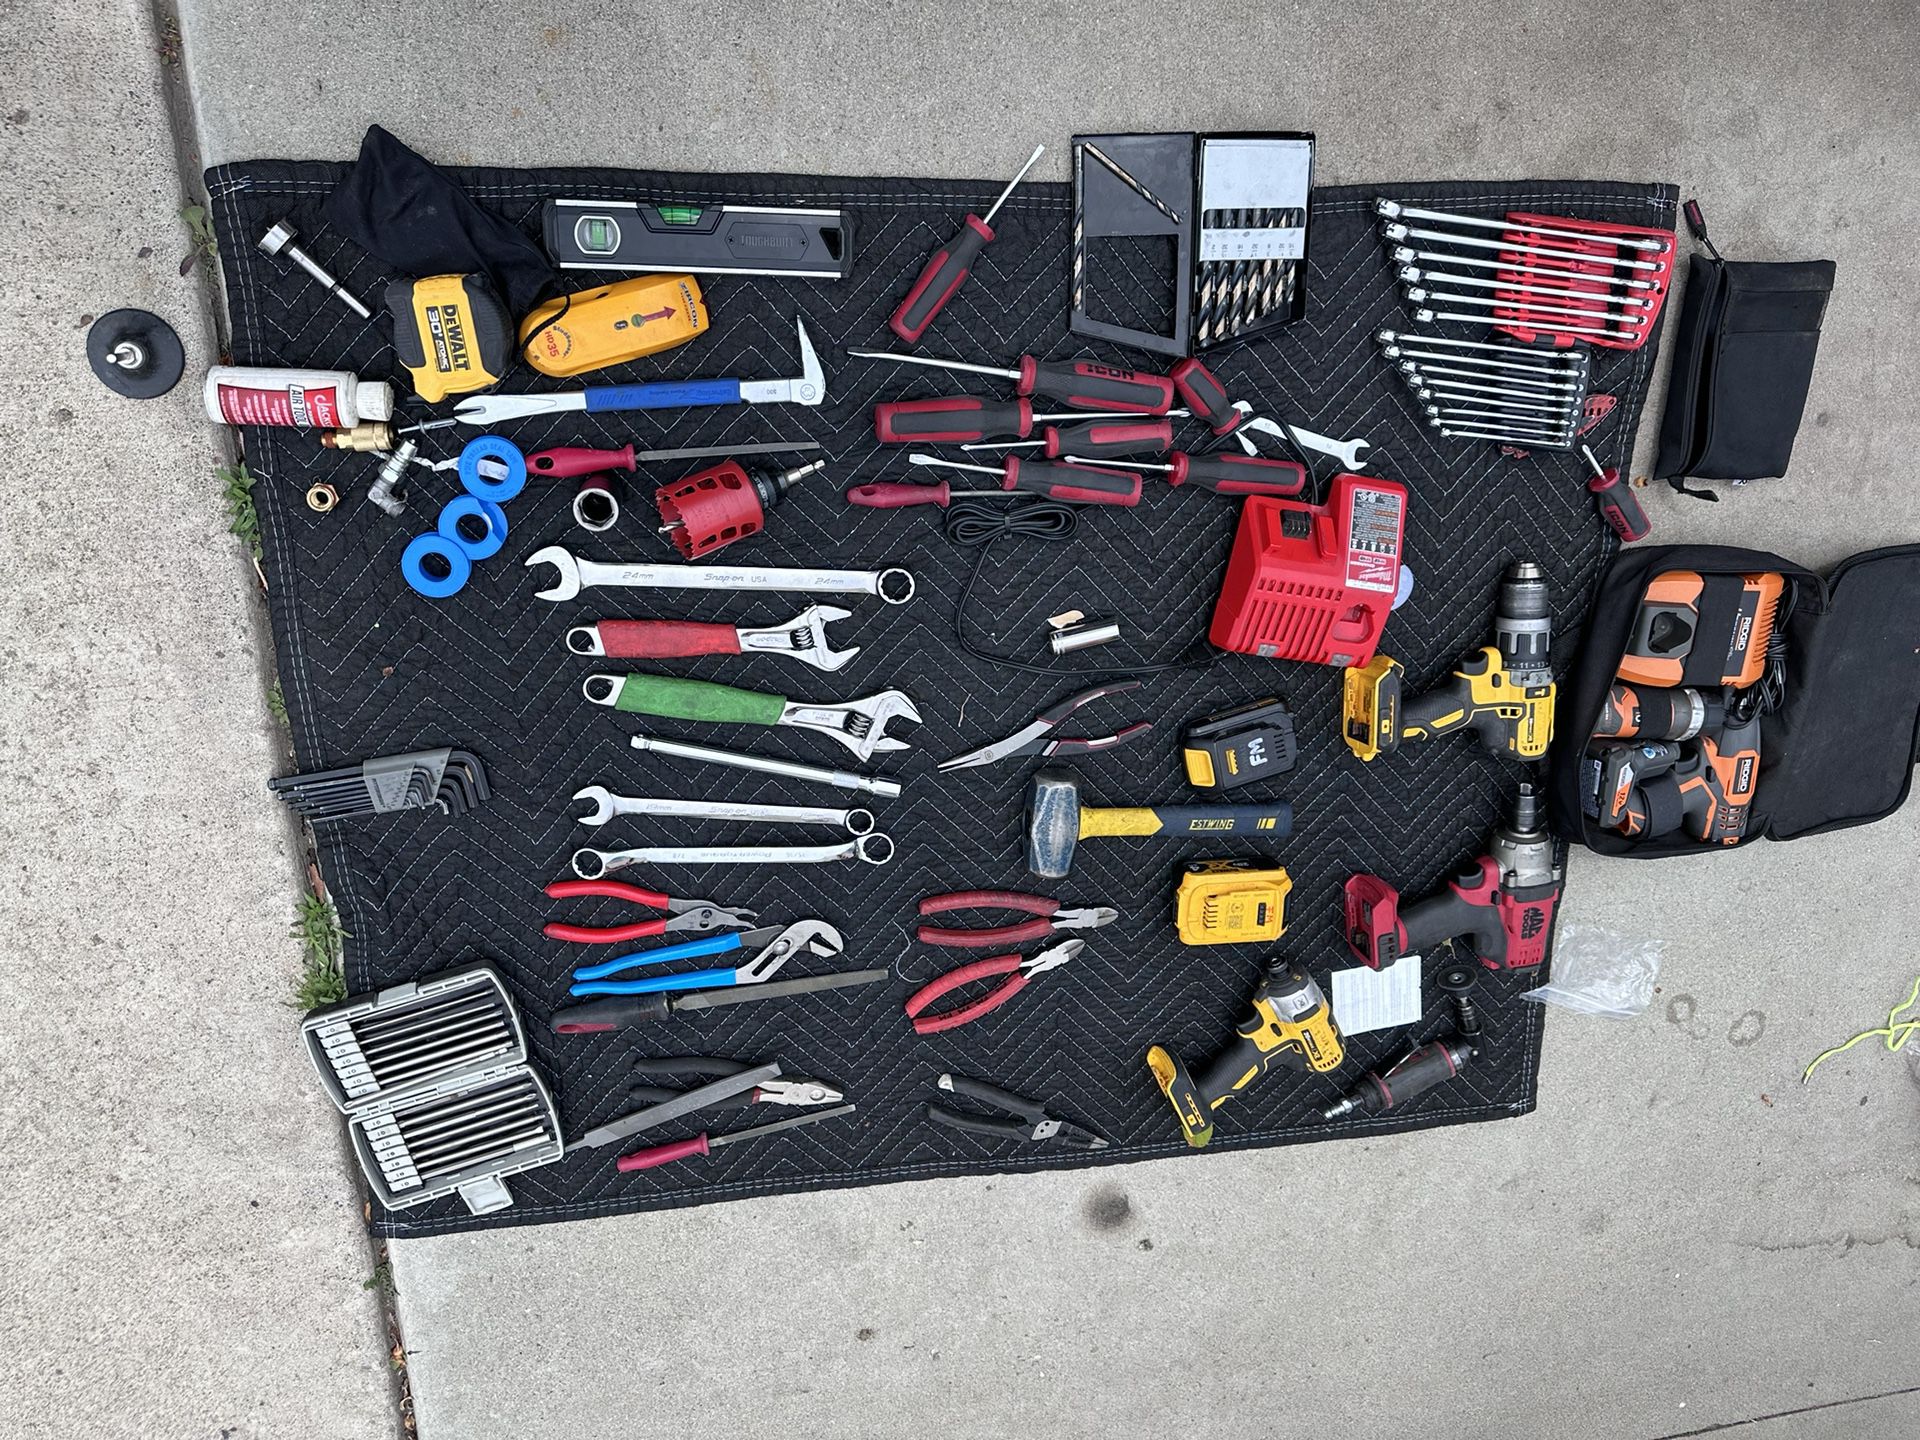 Brand Name Tools, mac Tools, Snapon Tools,  All In The Pics . No Low Ballers